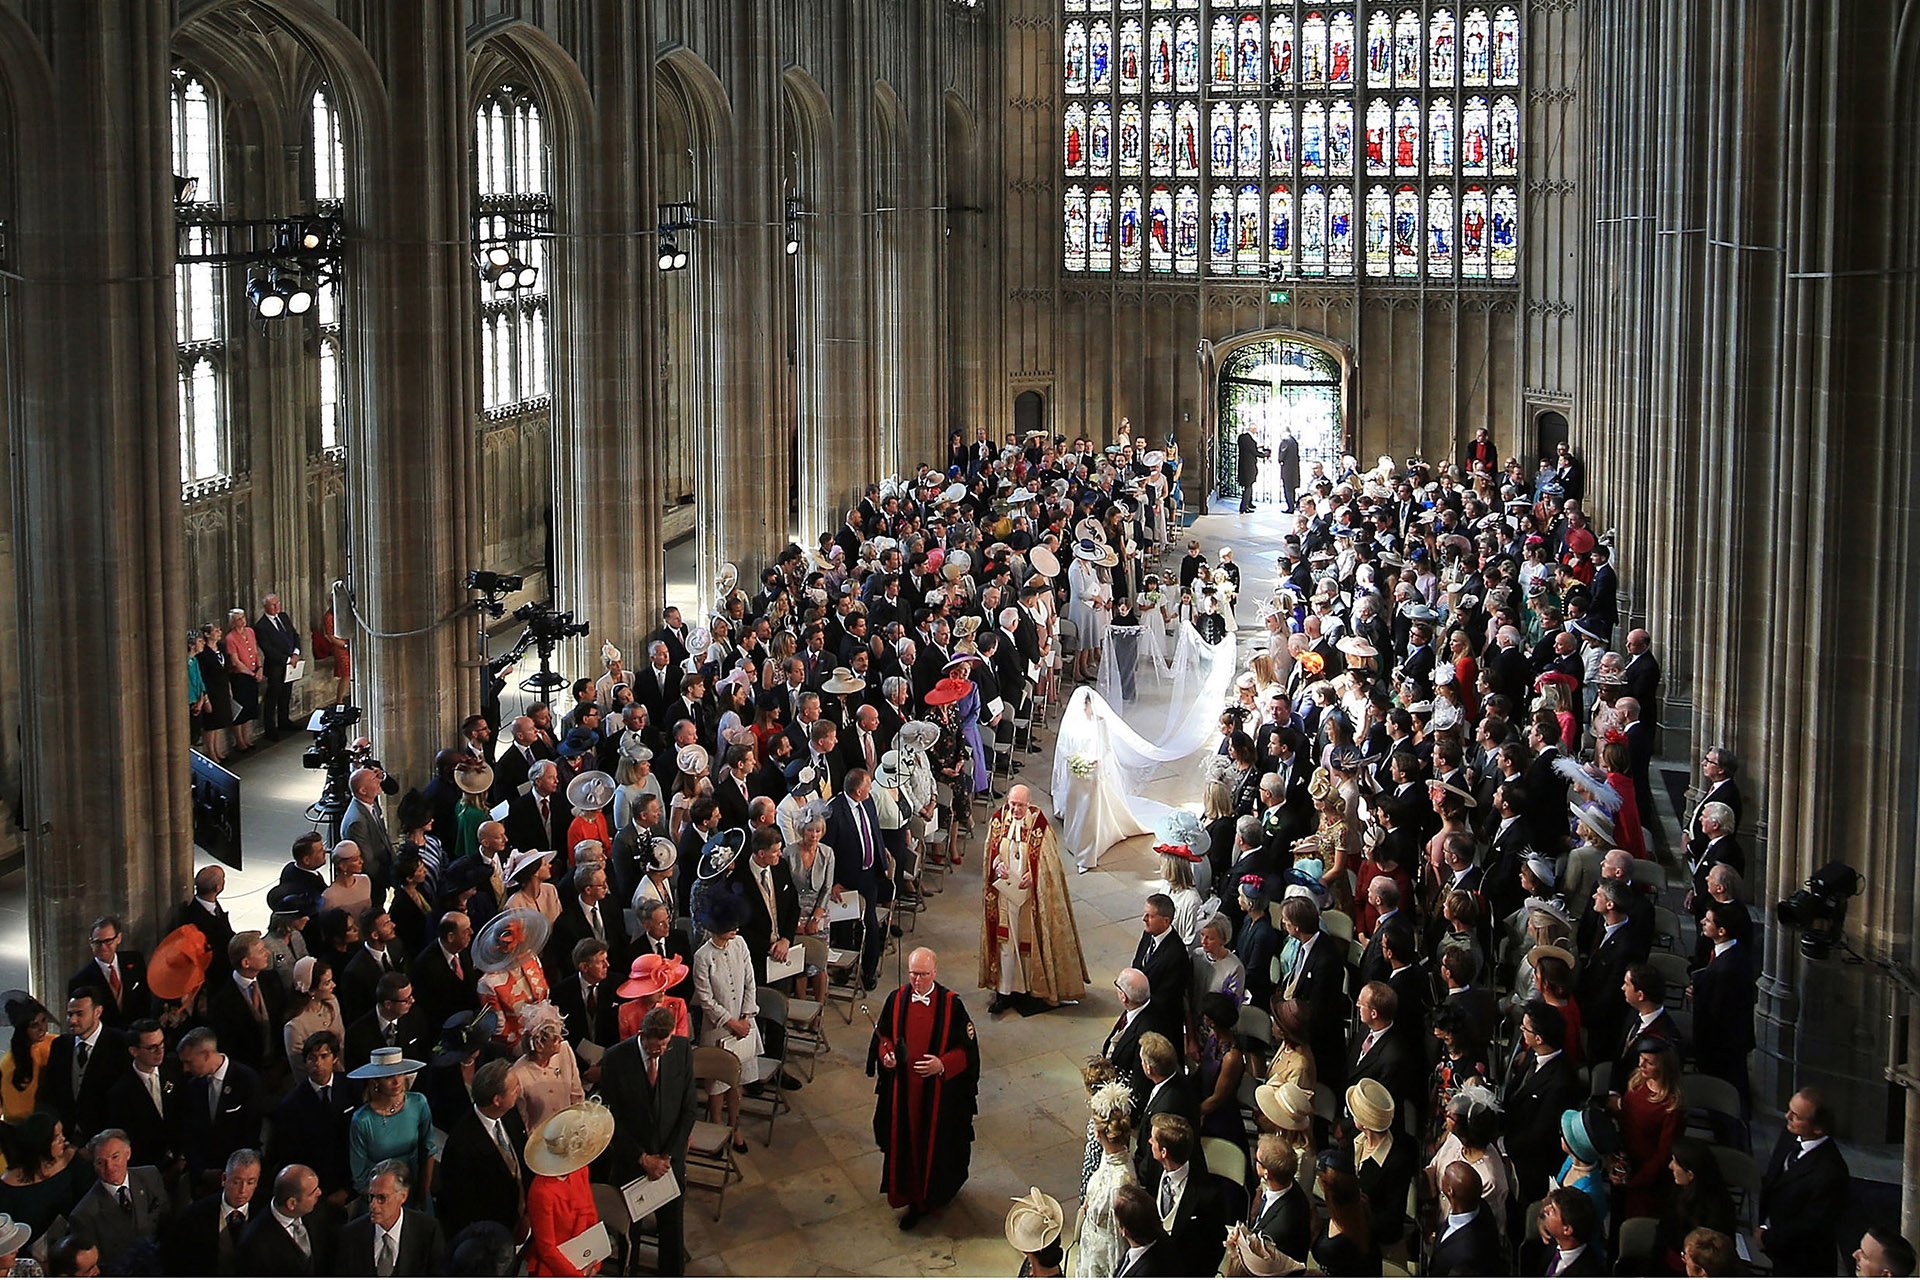 Meghan Markle and her bridal party walk down the aisle of St George's Chapel for the royal wedding